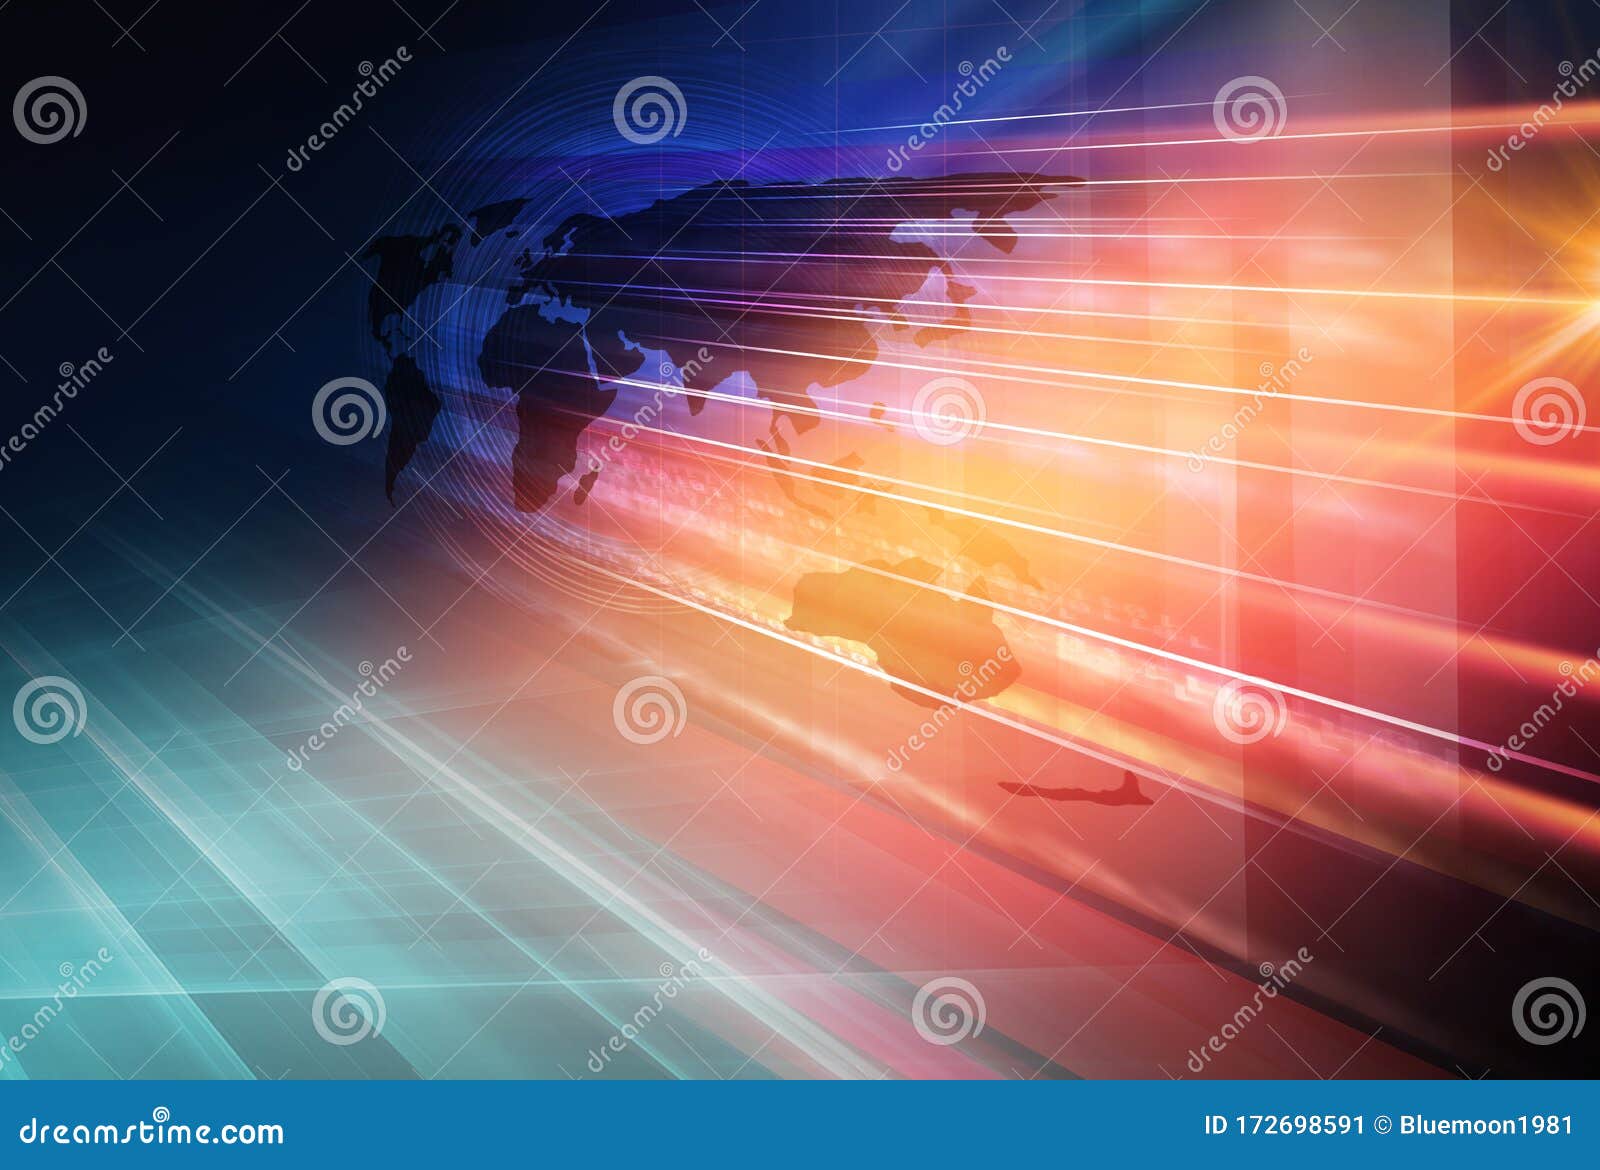 136 418 News Background Photos Free Royalty Free Stock Photos From Dreamstime